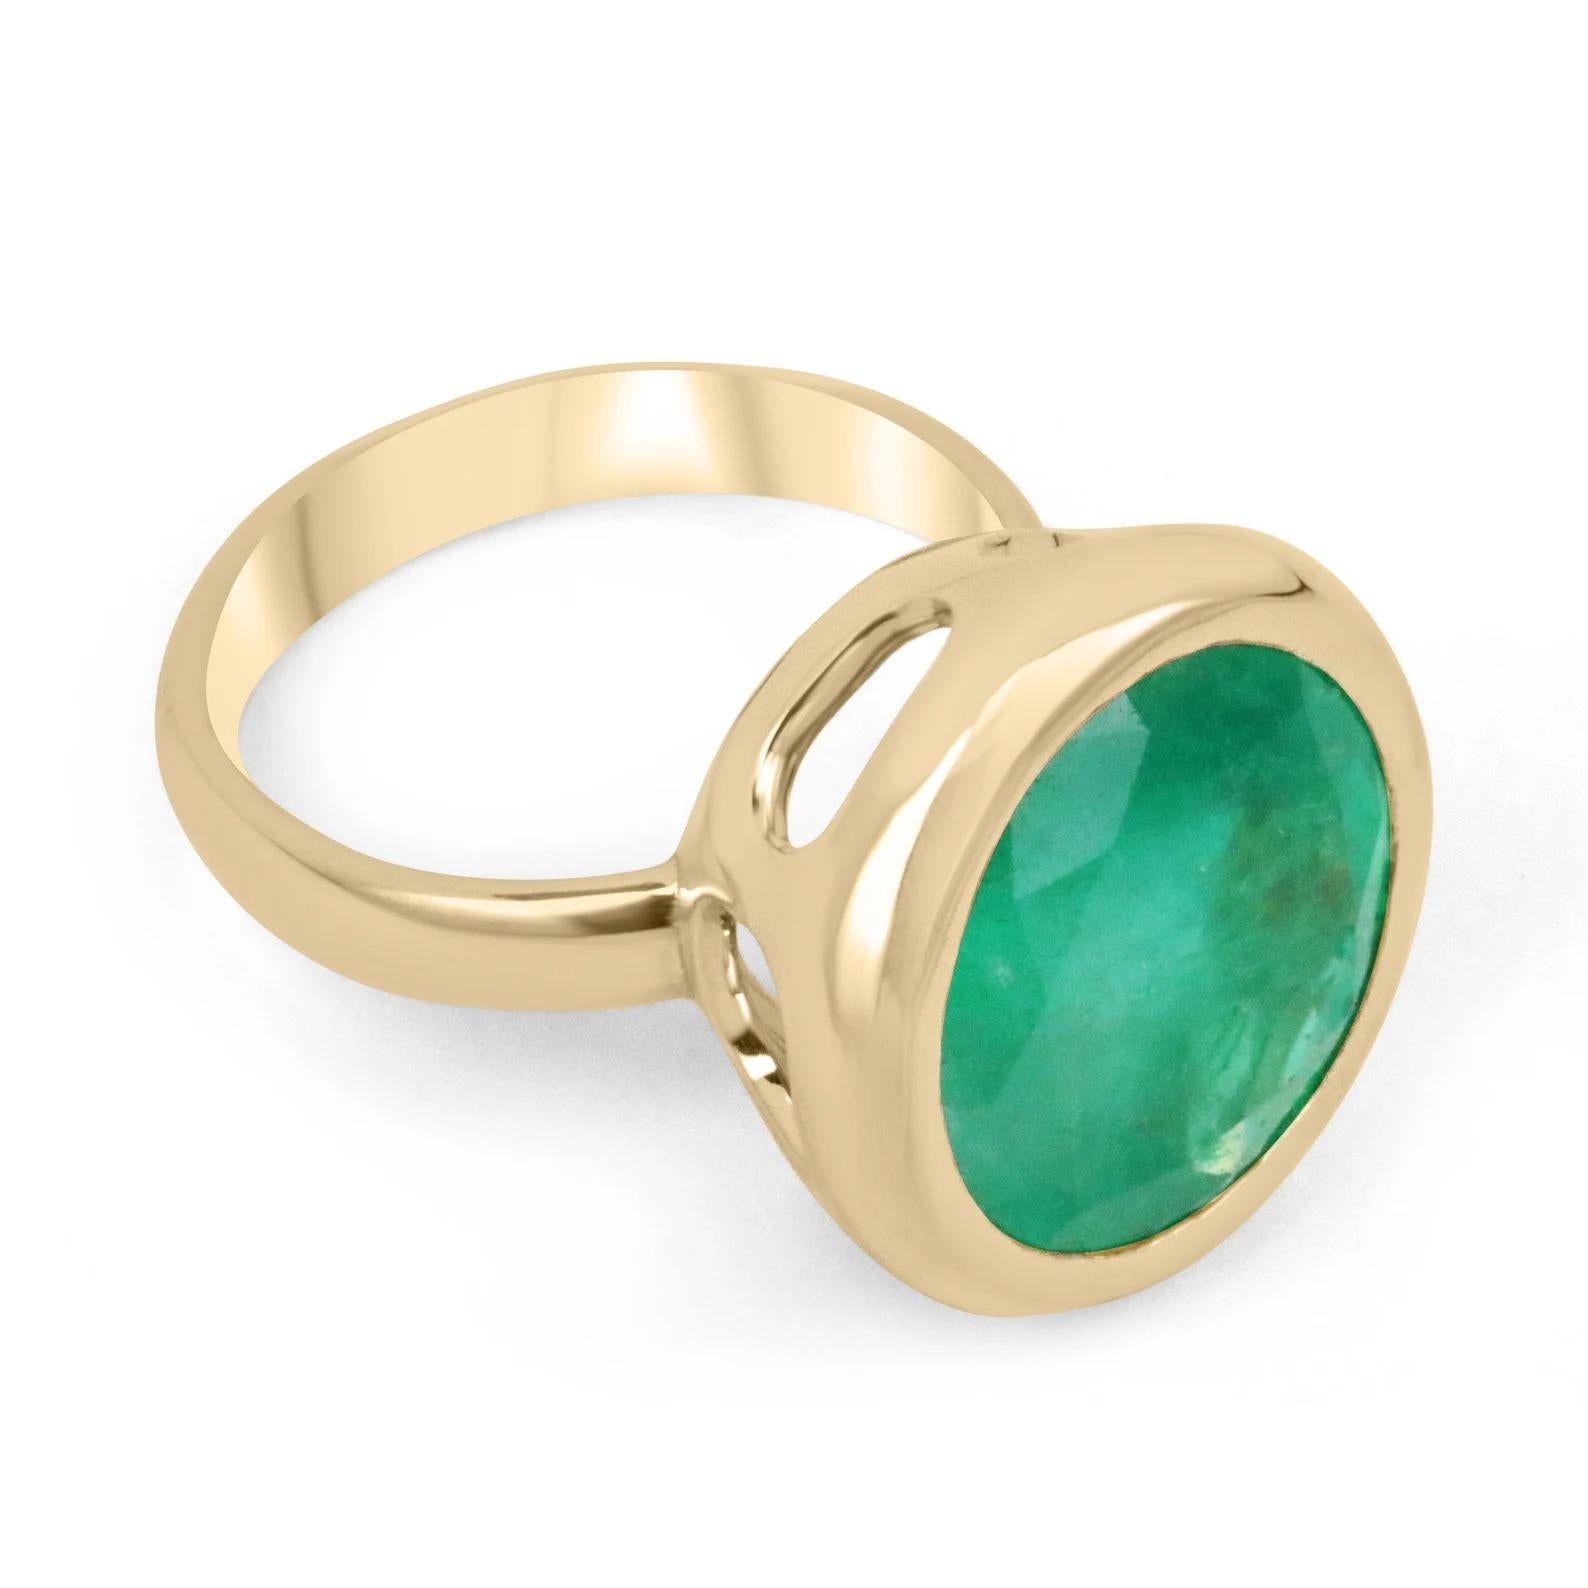 An exquisite Colombian emerald solitaire cocktail ring. Inspired by elaborate contemporary art, this piece shows how elegant simple can be. A large 11.33-carat, earth mined, round Colombian emerald sits delicately in a secure golden bezel. A rare